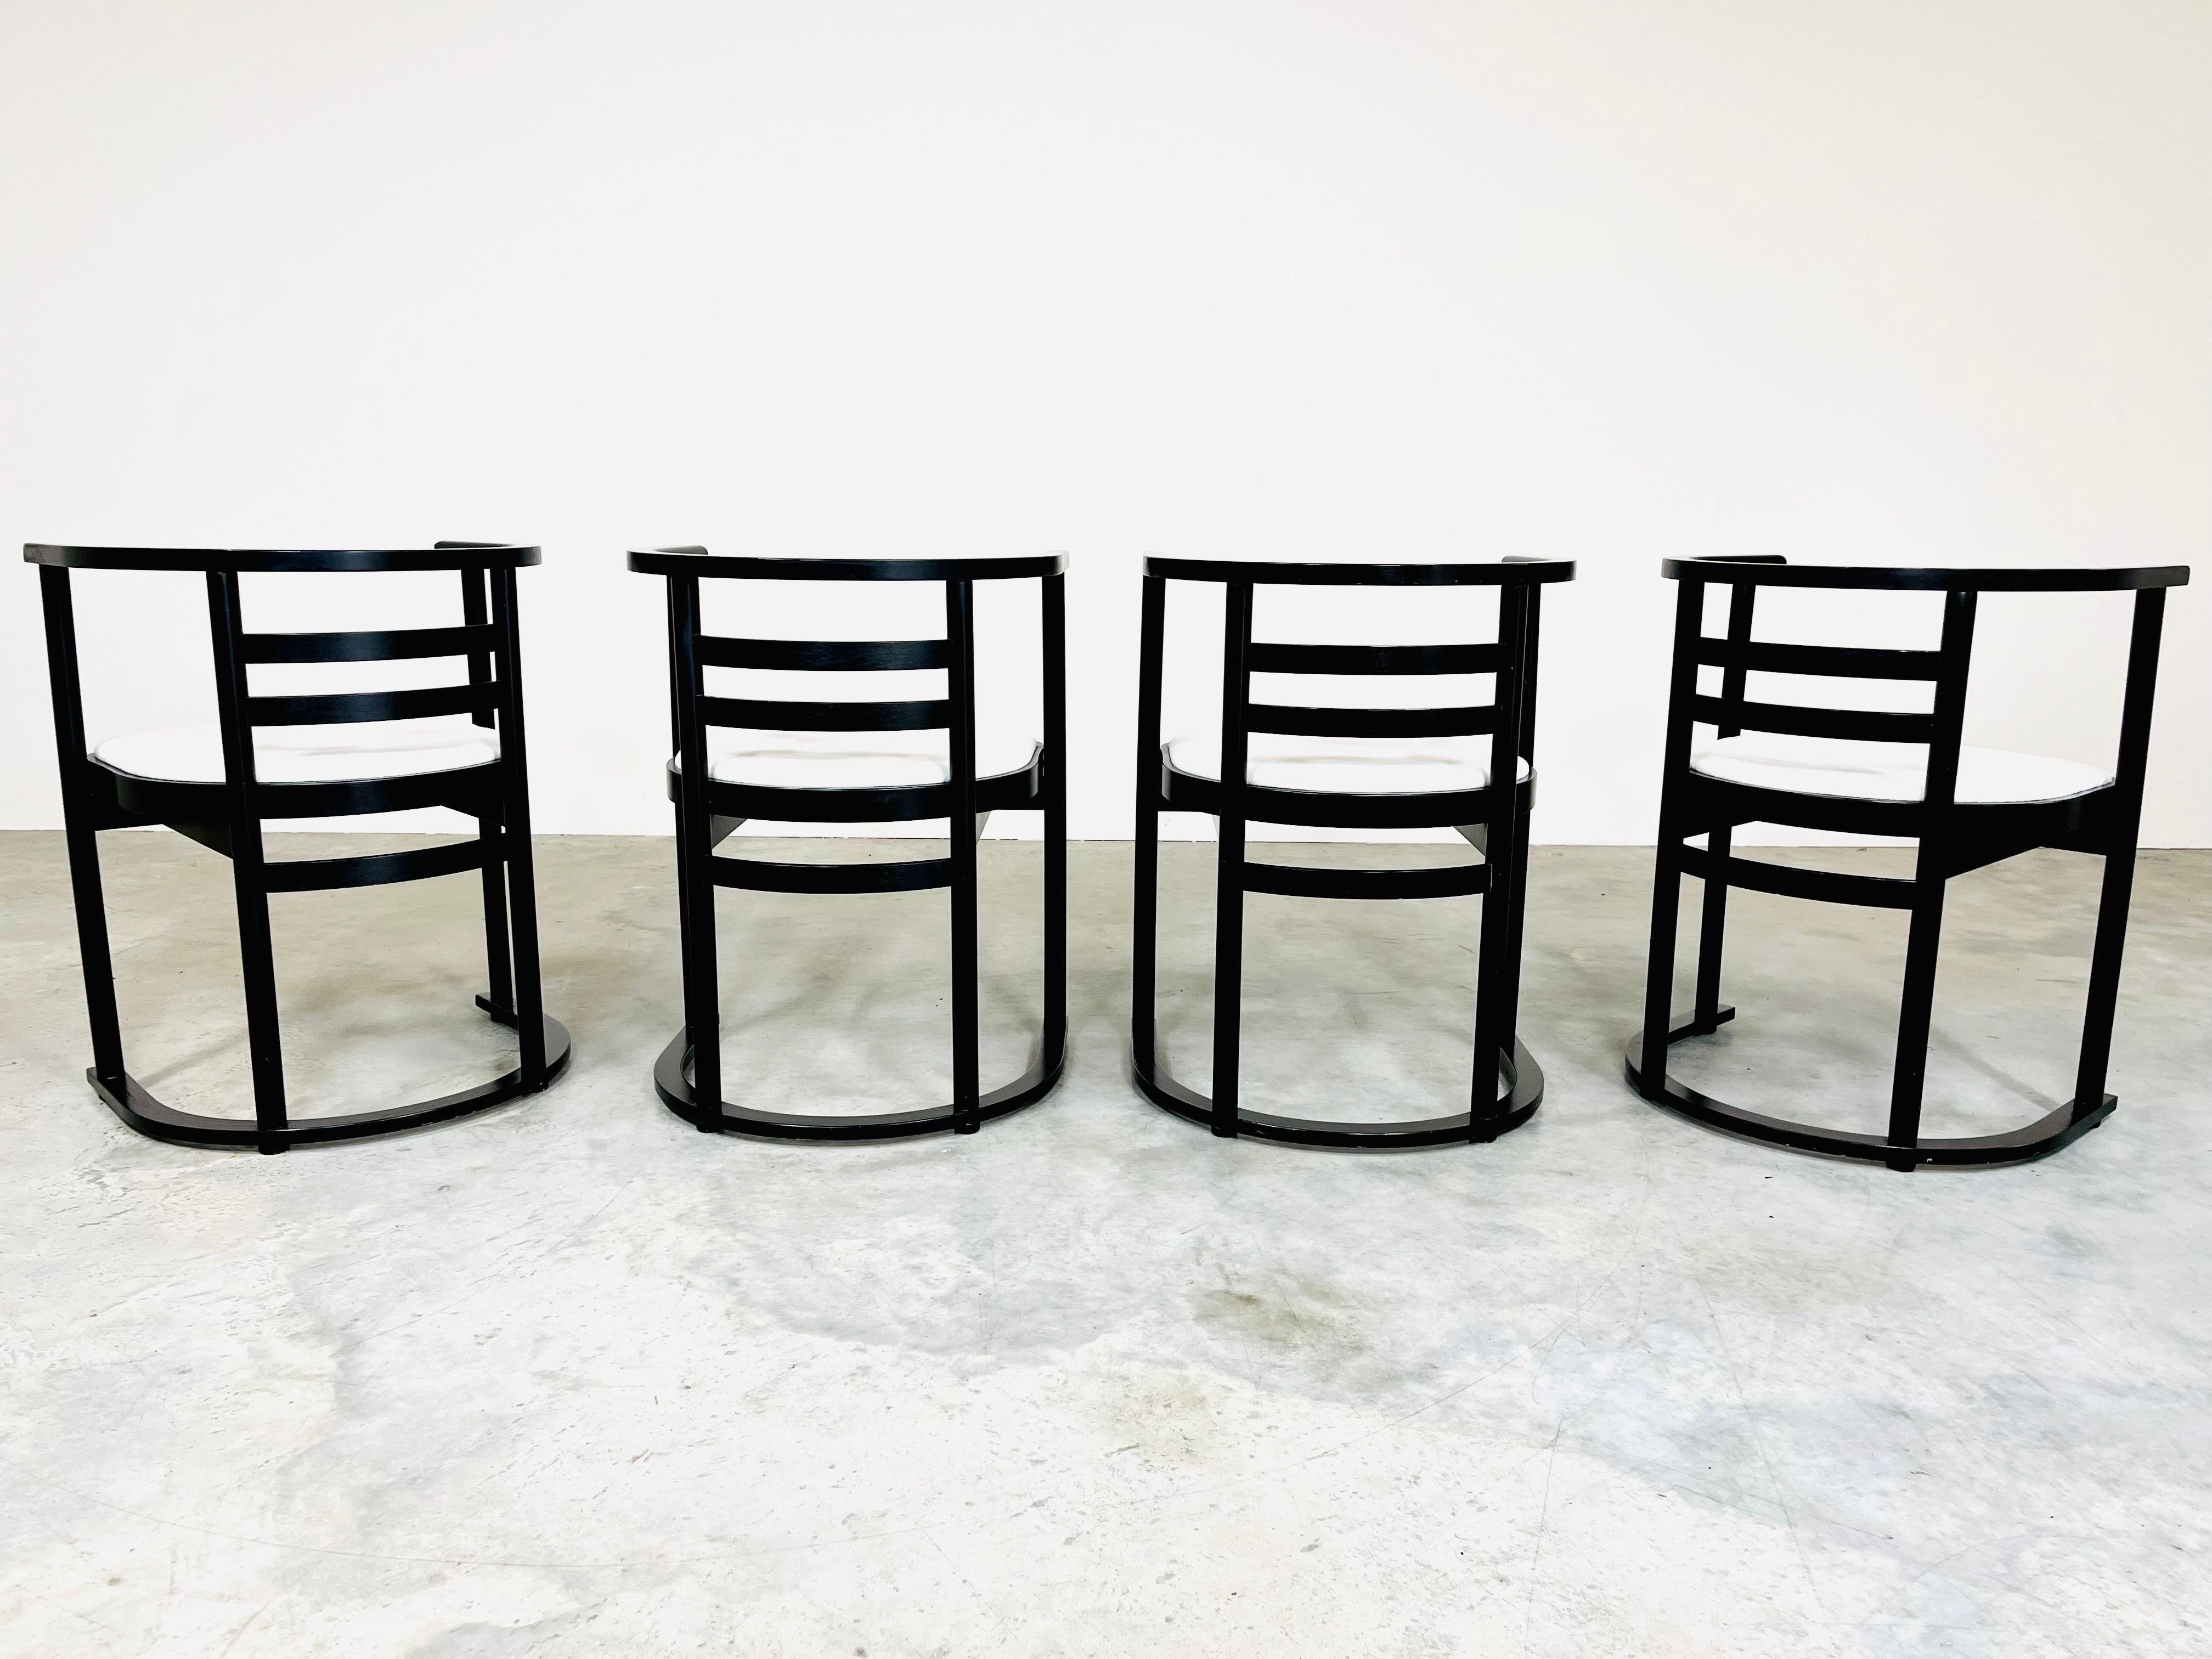 Steel 4 John R. Eckel Jr. Bauhaus Style Dining or Game Chairs, circa 1960, Denmark For Sale